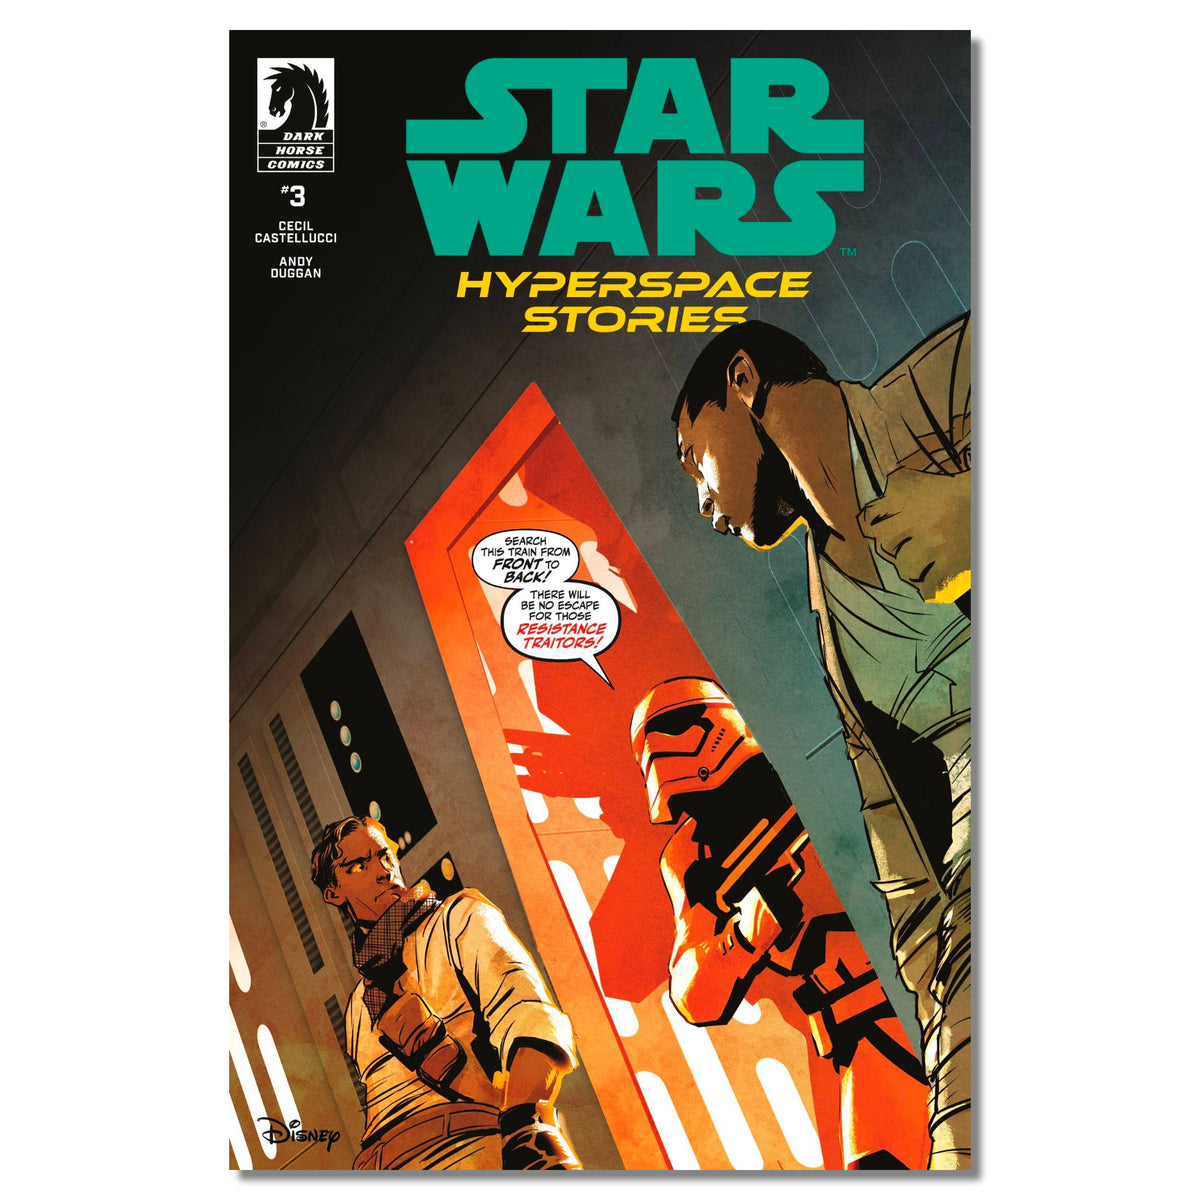 Star Wars Hyperspace Stories #3 Cover Variant NORD - FINAL SALE